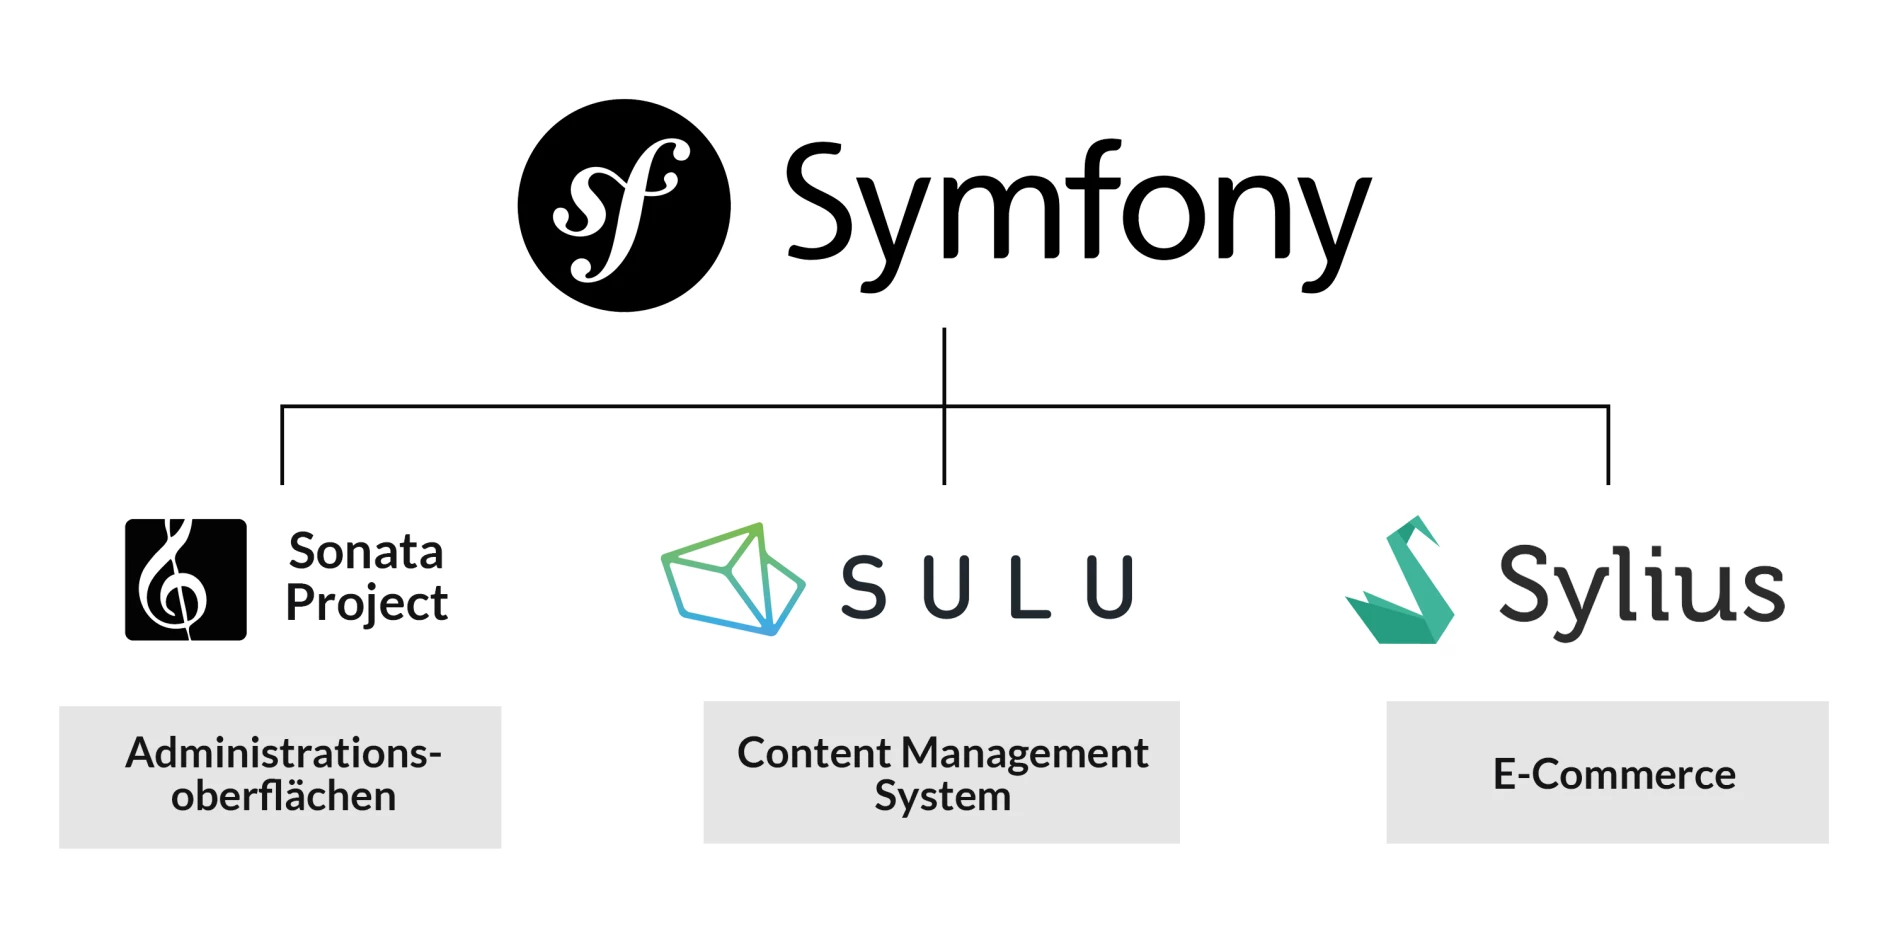 Diagram showing how Symfony, Sonata, Sulu and Sylius are interrelated